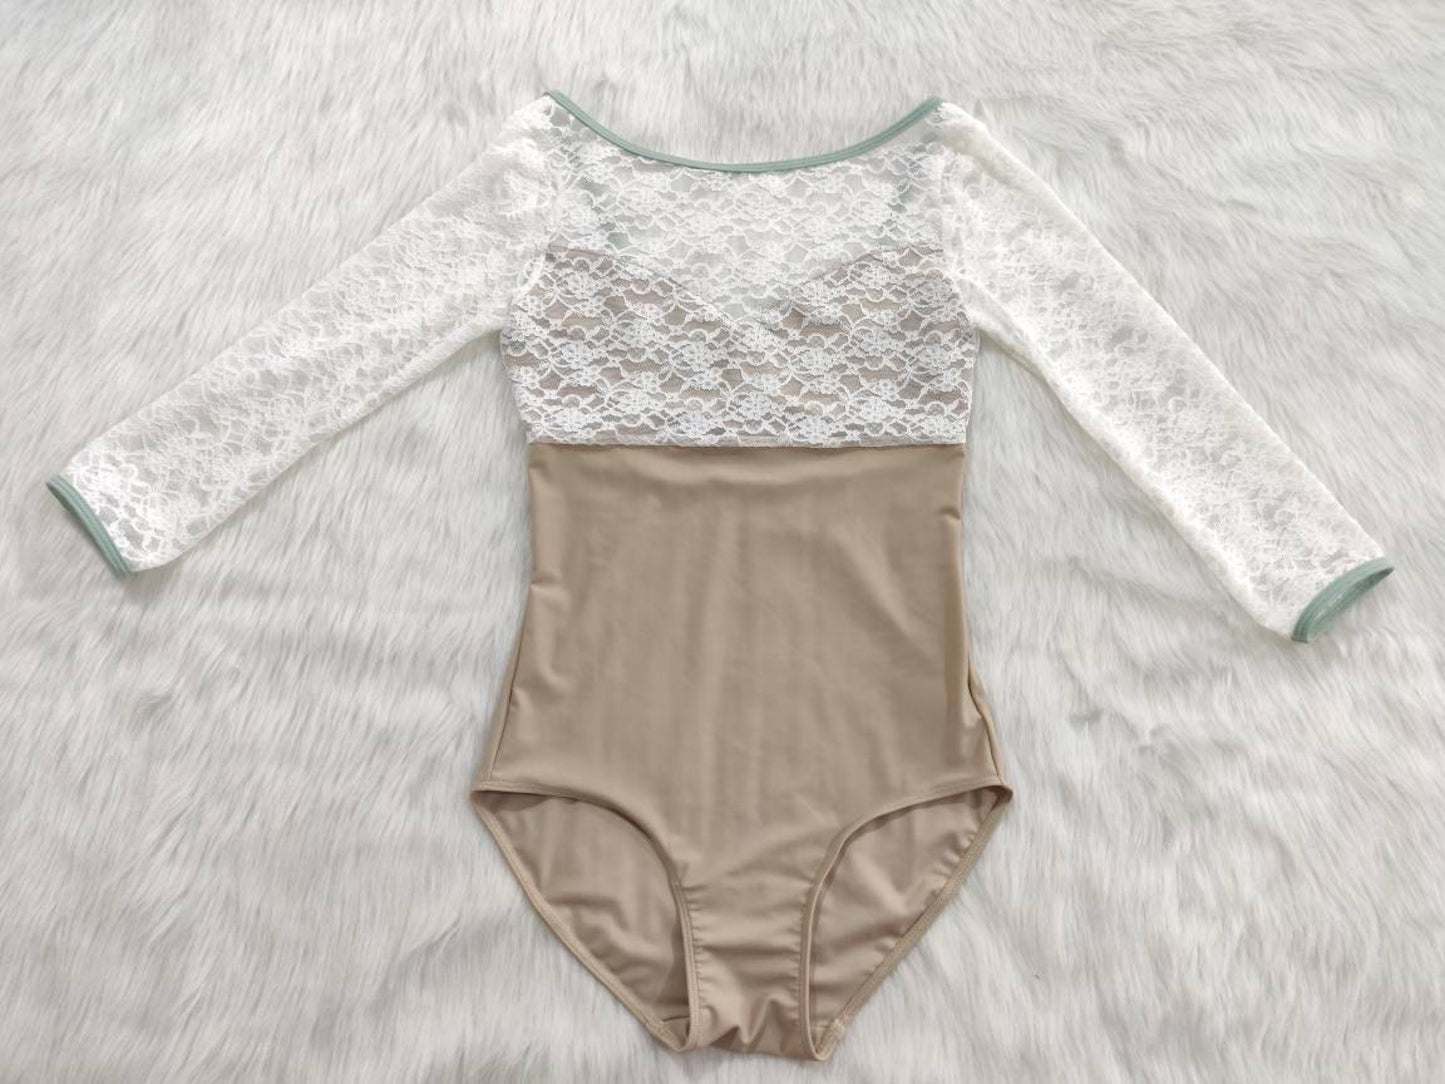 Chic Lace Long Sleeve Leotard♡Beige (Scheduled to be released around the end of February)